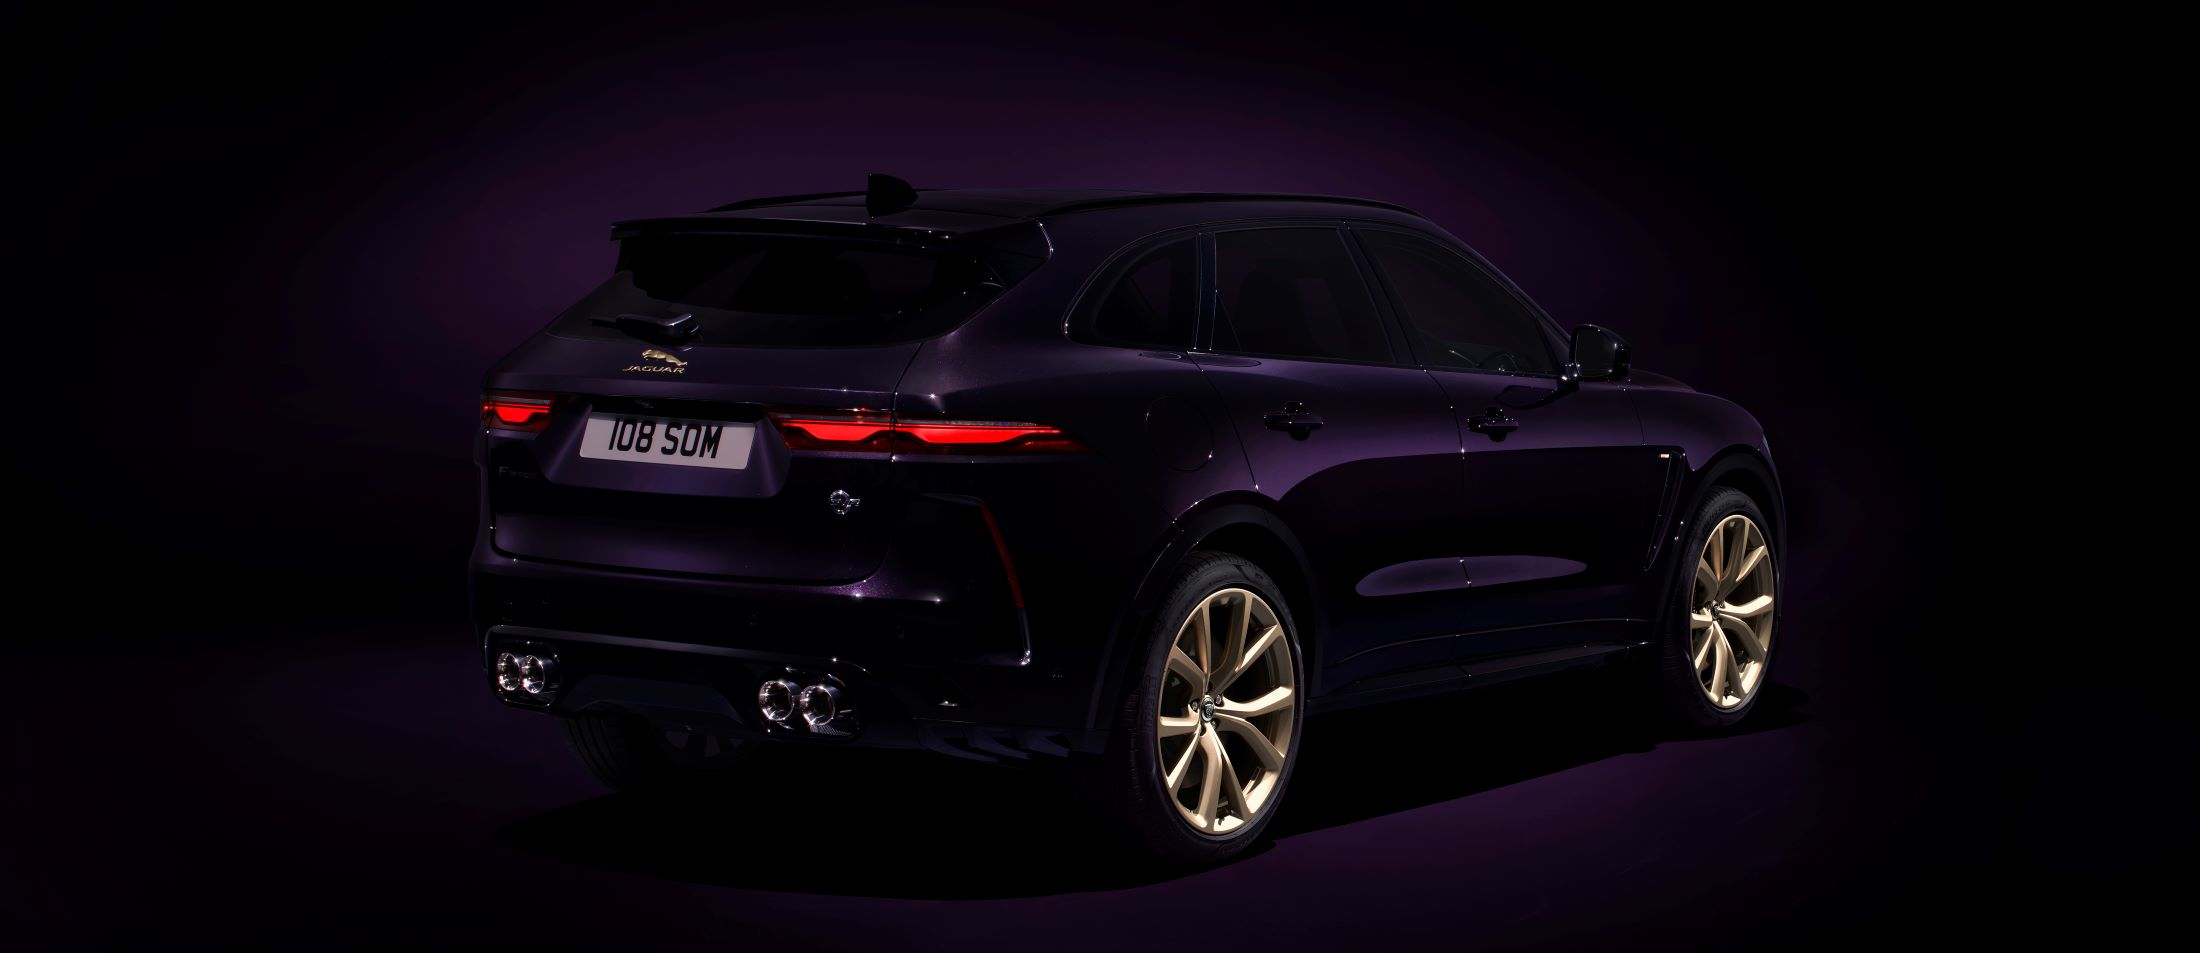 Rear three quarters view of the Jaguar F-Pace SVR Edition 1988